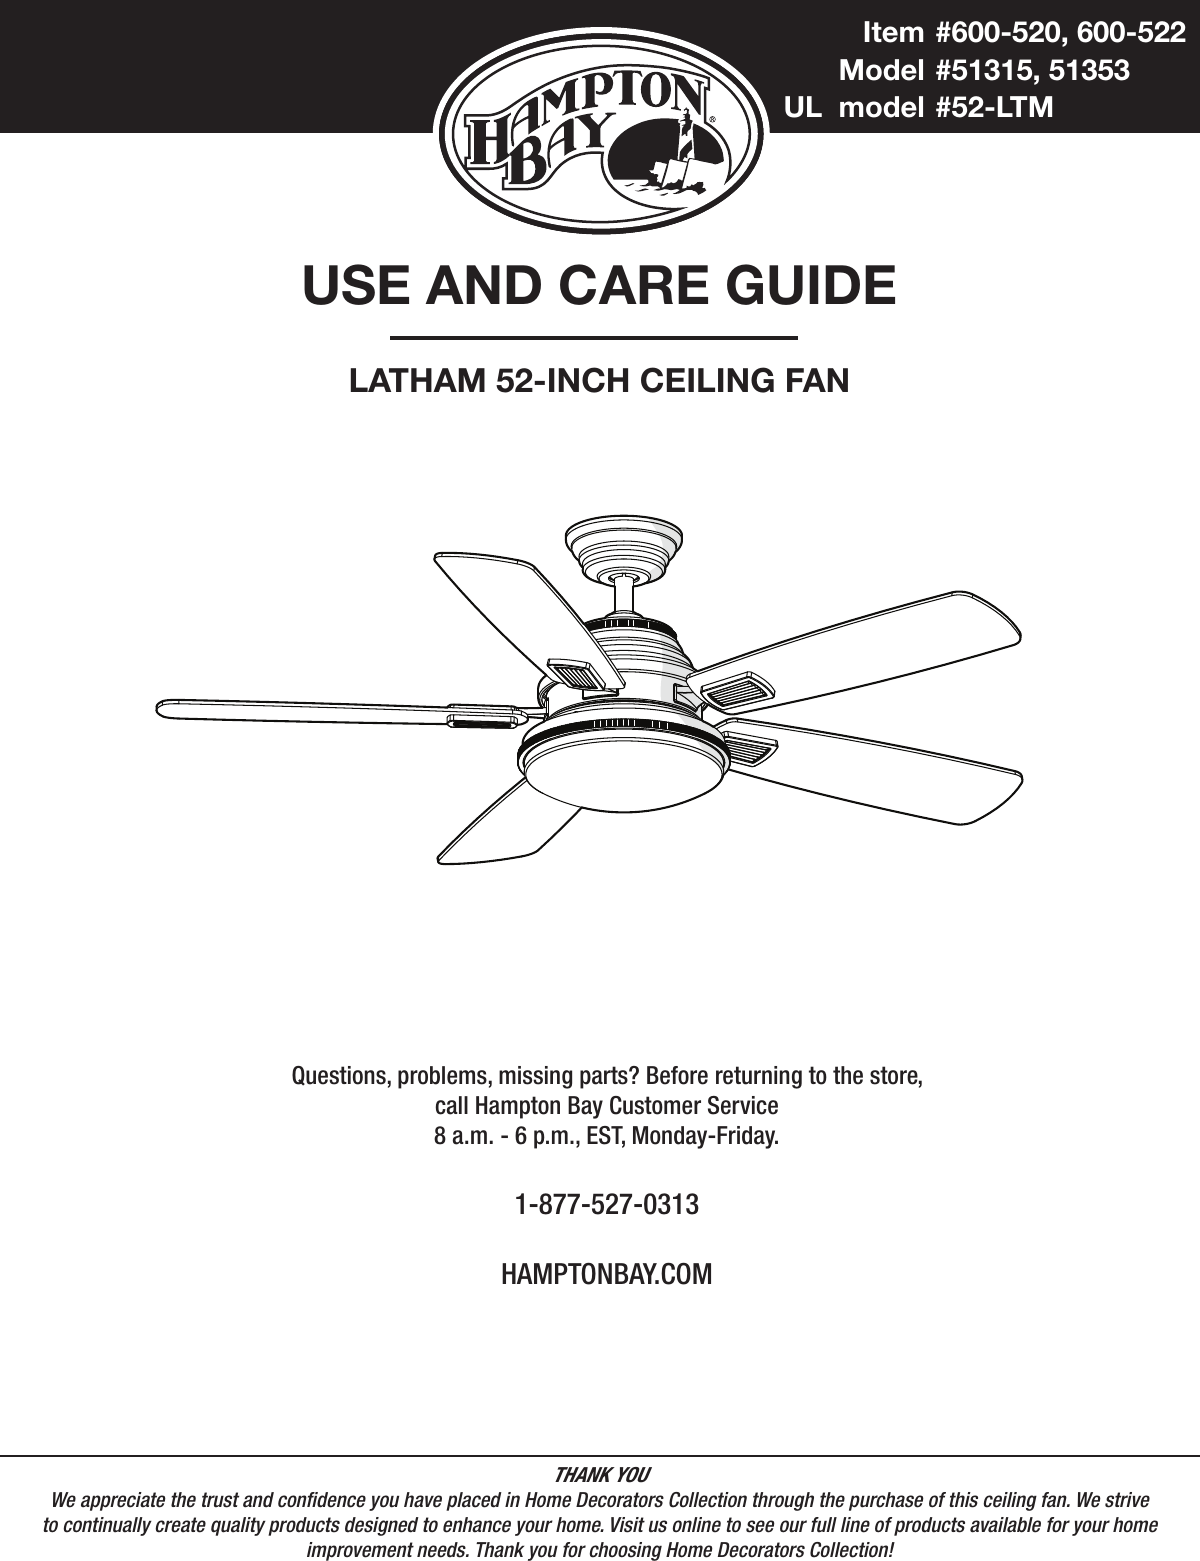 USE AND CARE GUIDELATHAM 52-INCH CEILING FANQuestions, problems, missing parts? Before returning to the store,call Hampton Bay Customer Service8 a.m. - 6 p.m., EST, Monday-Friday.1-877-527-0313HAMPTONBAY.COMTHANK YOUWe appreciate the trust and condence you have placed in Home Decorators Collection through the purchase of this ceiling fan. We strive to continually create quality products designed to enhance your home. Visit us online to see our full line of products available for your home improvement needs. Thank you for choosing Home Decorators Collection!  Item  #600-520, 600-522   Model  #51315, 51353 UL  model  #52-LTM